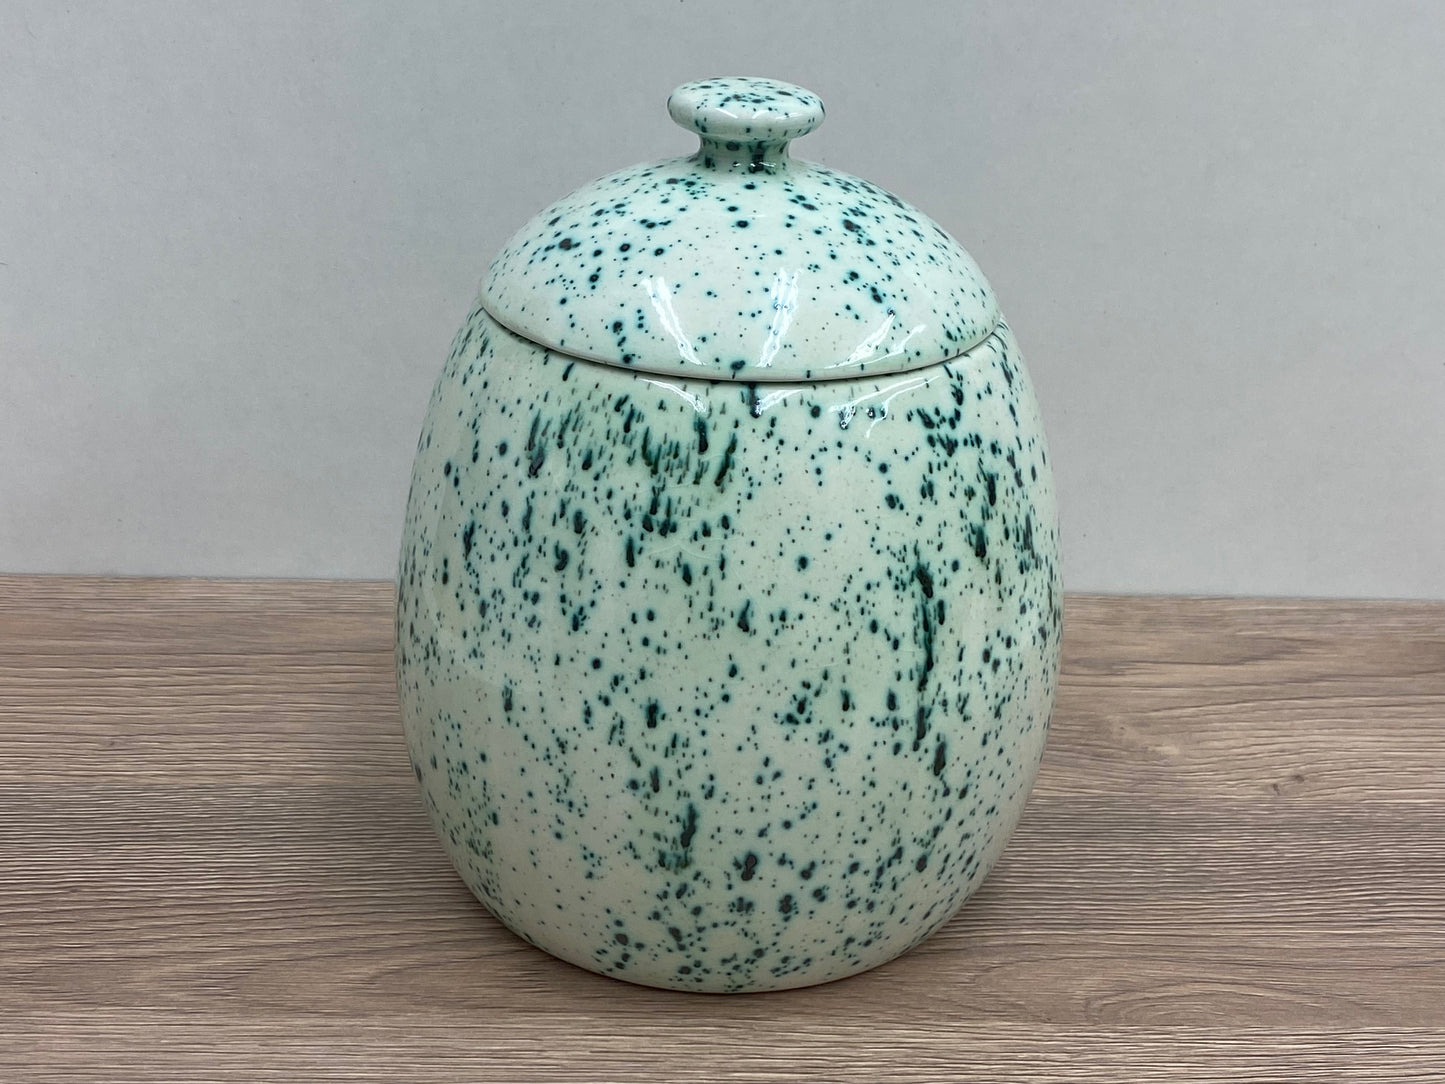 Cookie/Biscuit Jar Canister Speckled Green